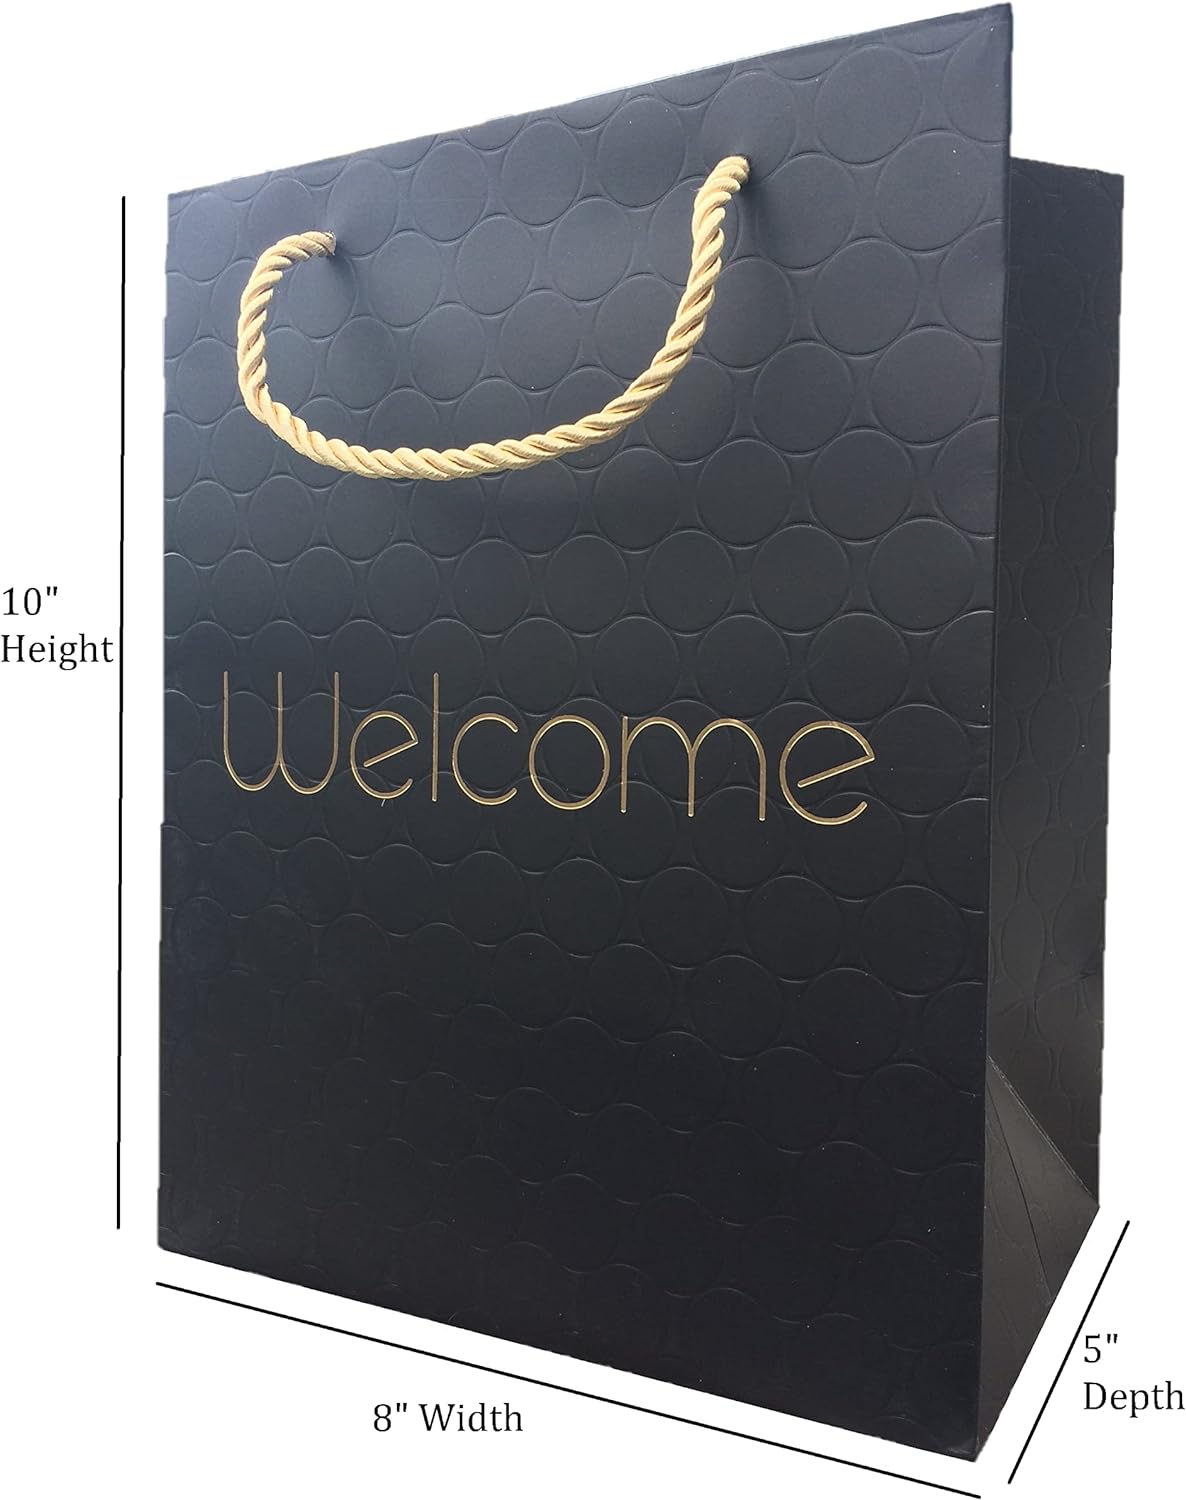 Welcome Gift Bags with Gold Handles 8x5x10 Medium Size, Elegant Hostess or Wedding Premium Black Paper Bag for Guests